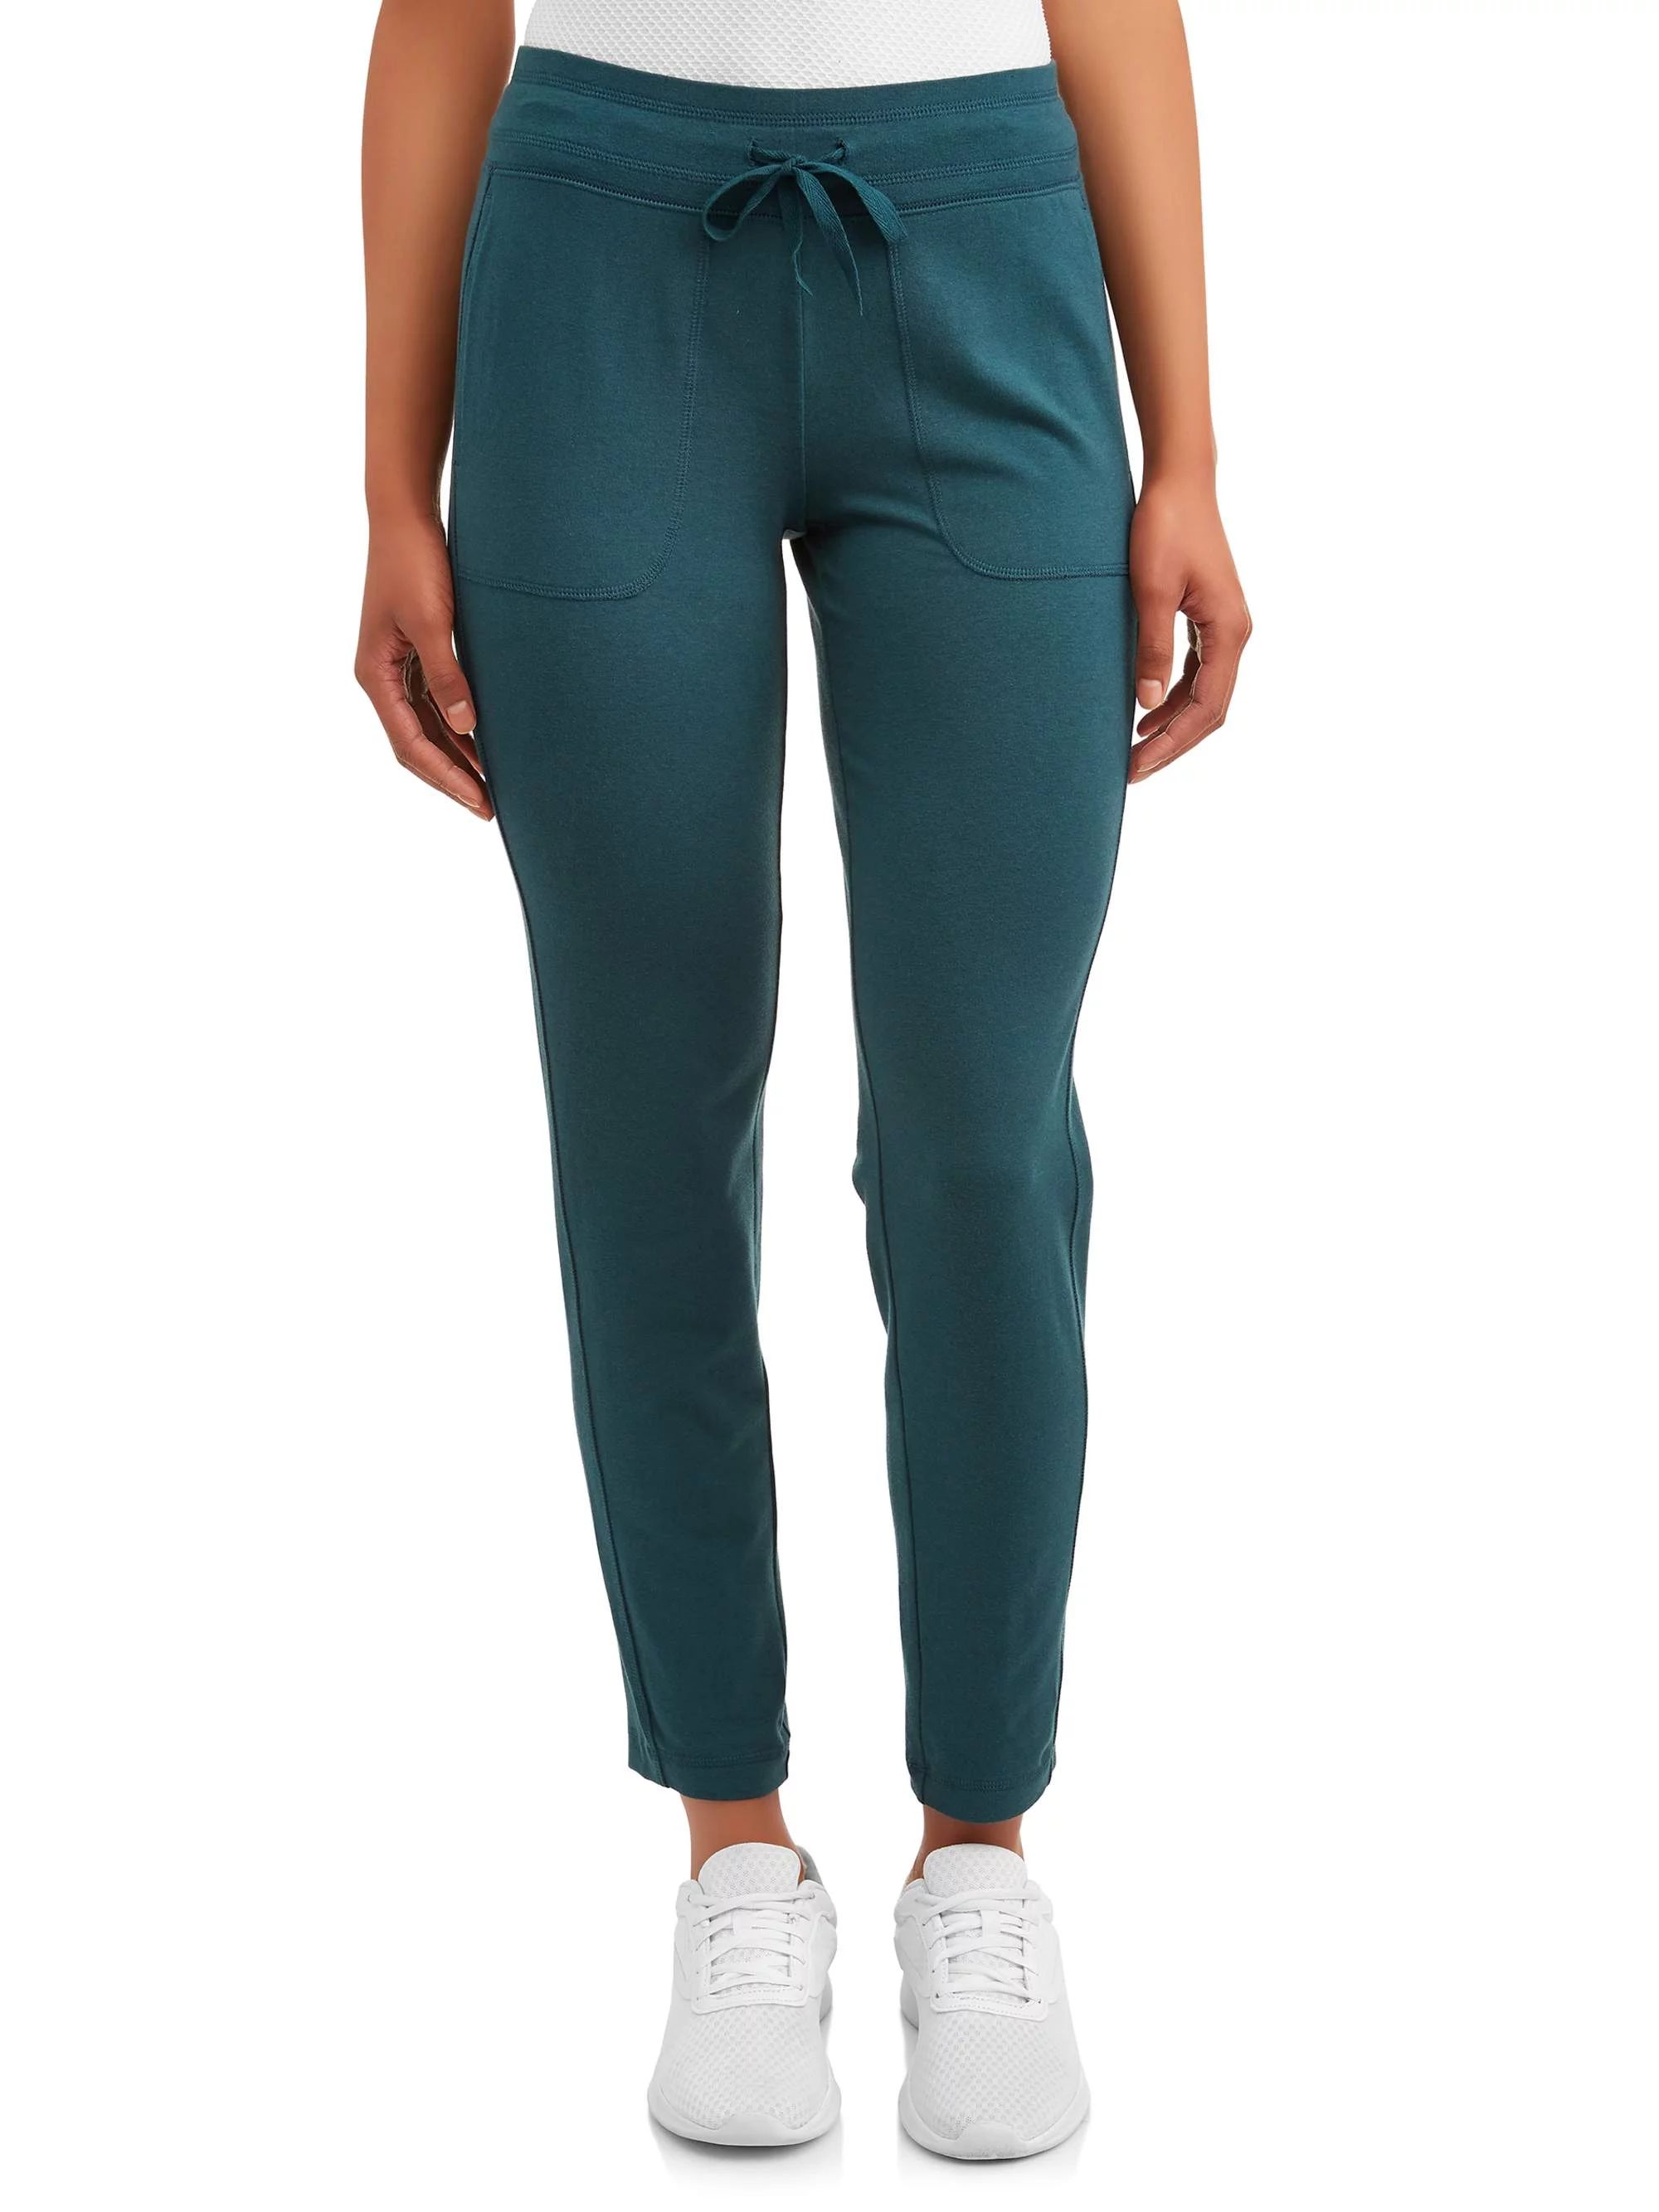 Athletic Works Women's Athleisure Knit Pant Available in Regular and Petite | Walmart (US)